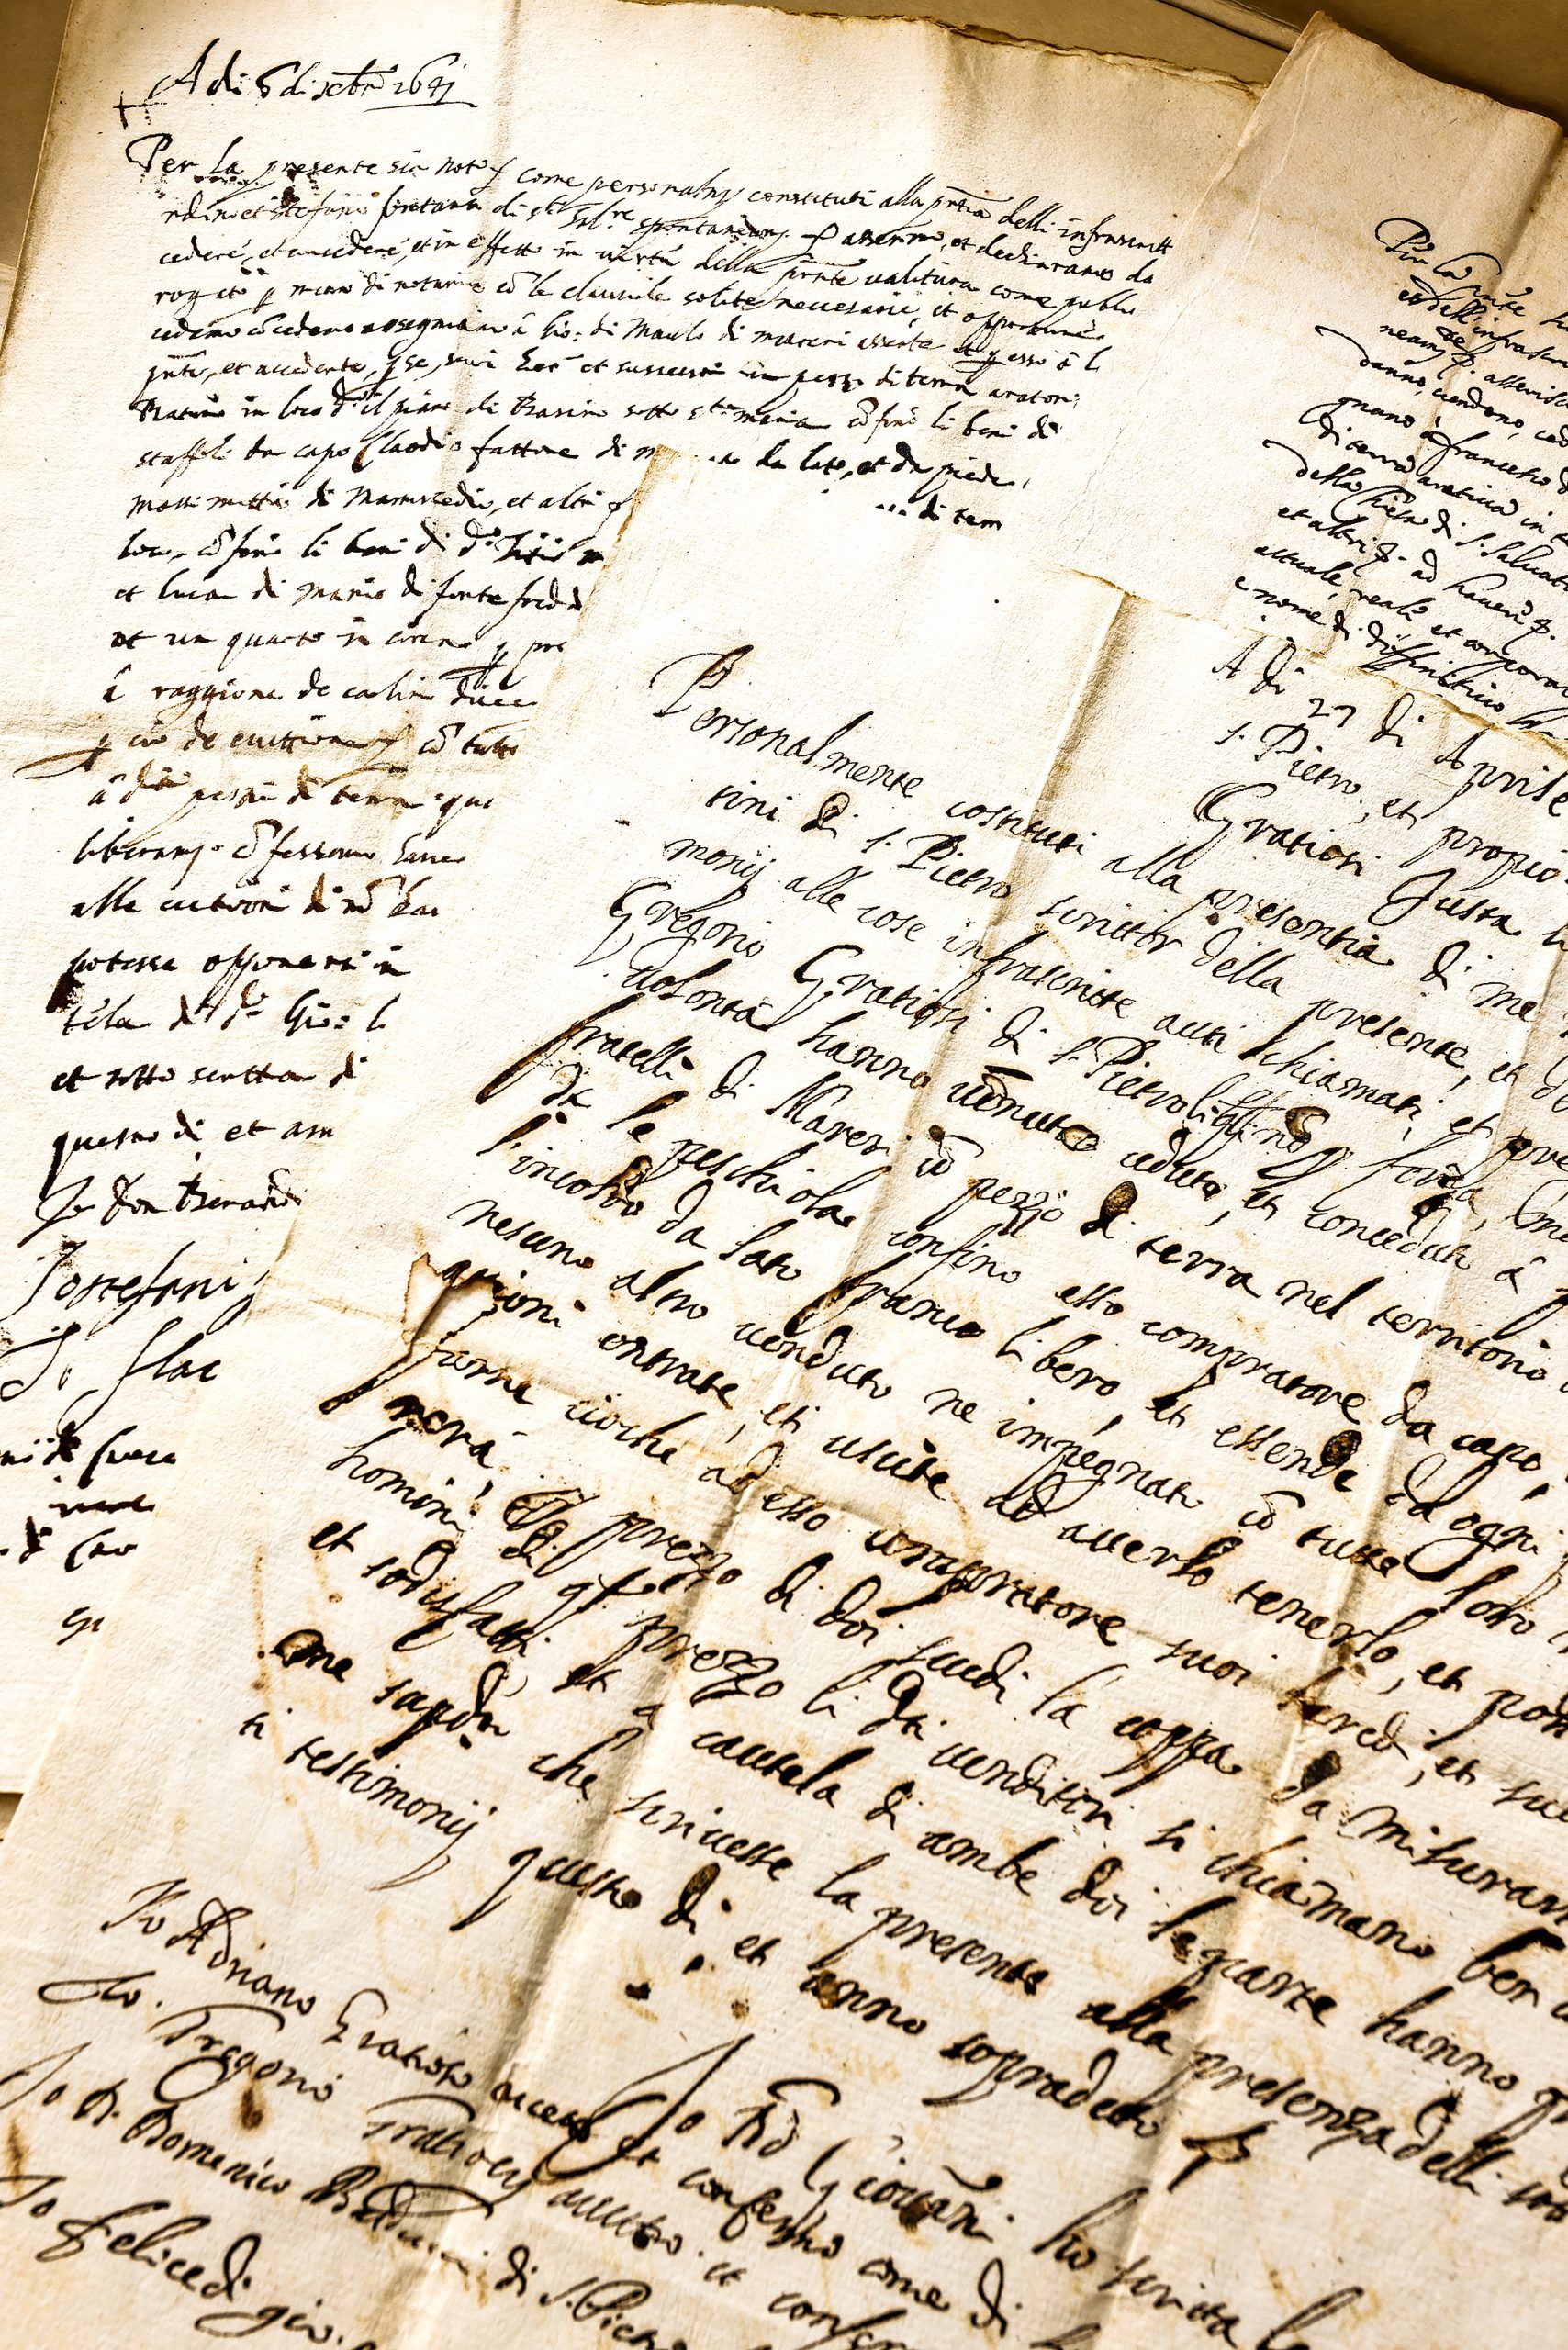 Eligio has carefully preserved old Maoli family documents from the 1600s, the oldest of which is a business contract about the transaction of some property. It is written in half Italian and half Latin because at the time the languages were frequently intermixed. 